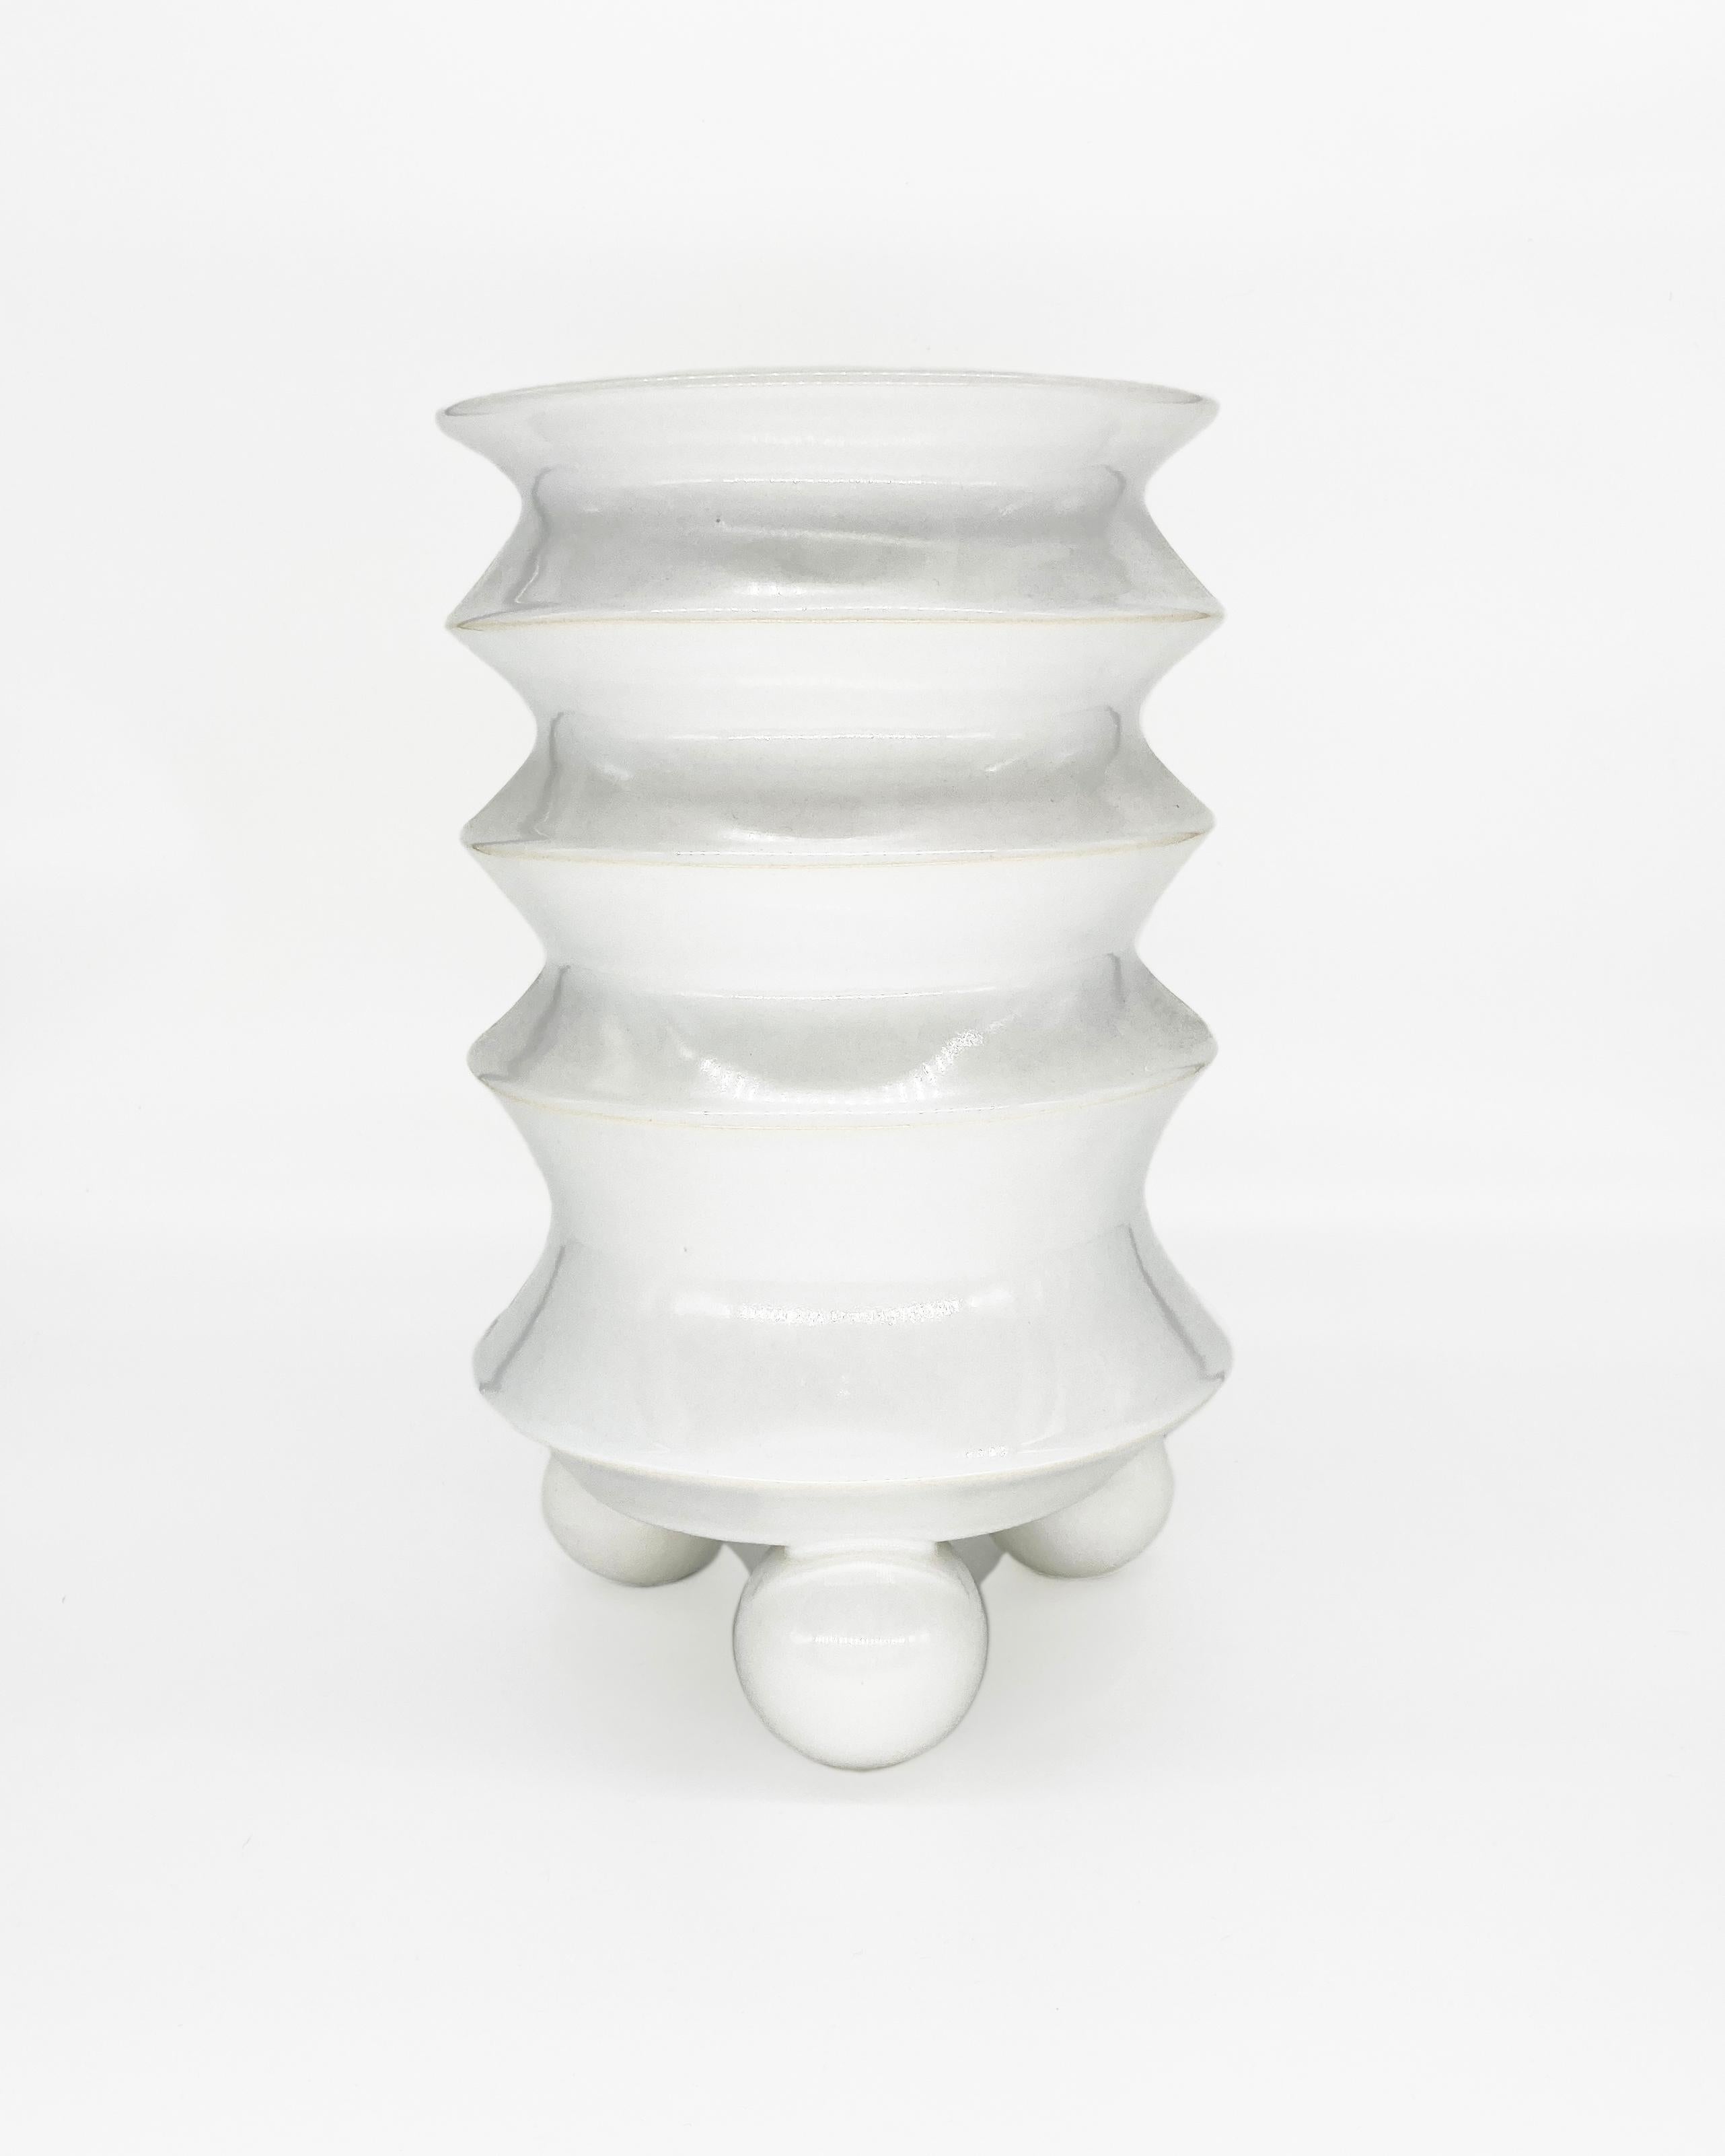 First Edition Toltec Pop Art Ceramic Vase in White, in Stock In New Condition For Sale In West Hollywood, CA